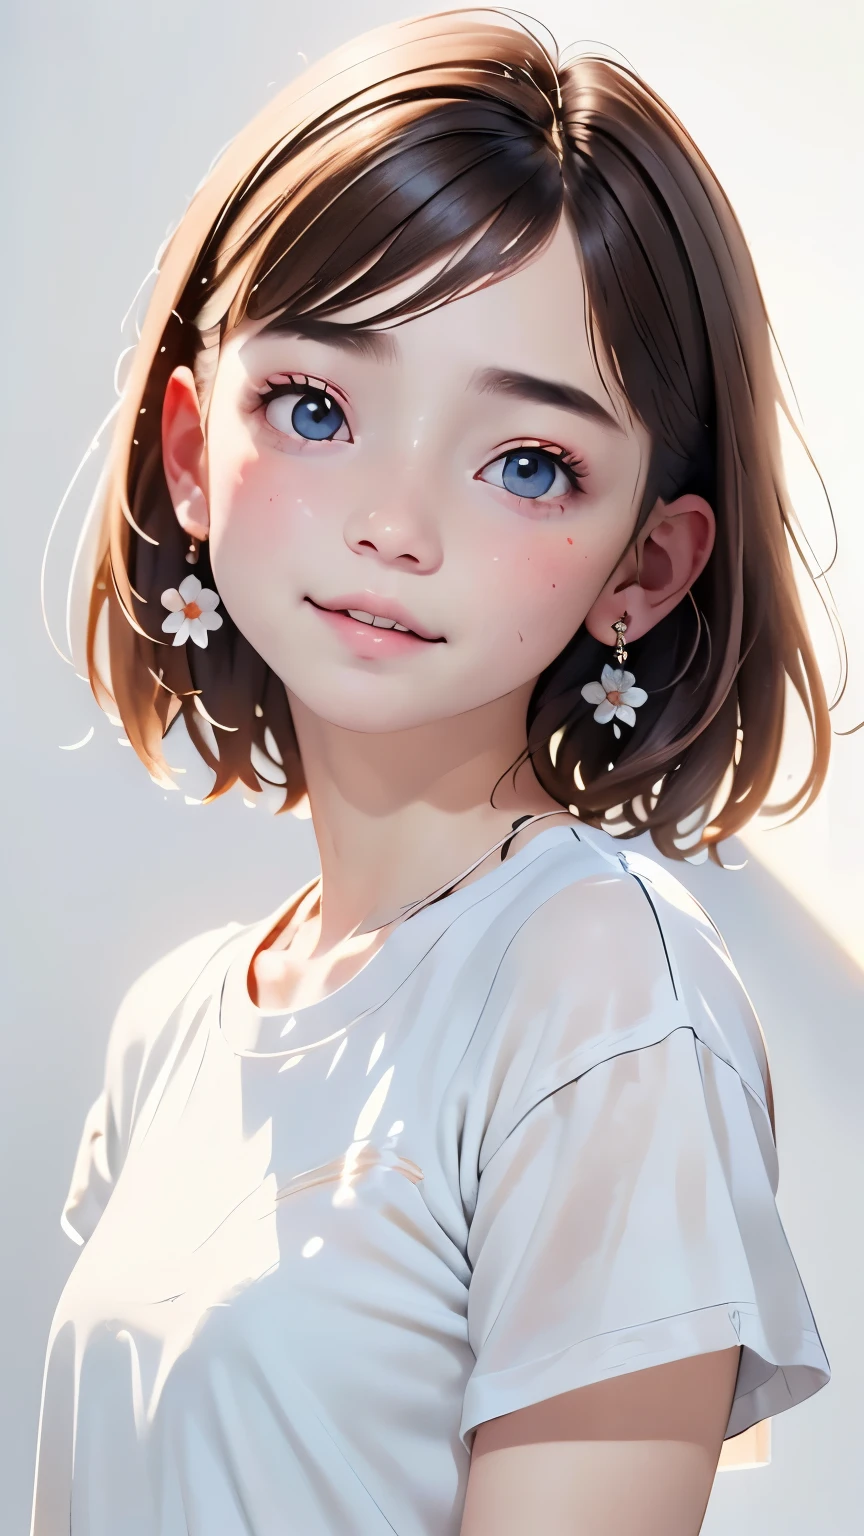 portrait、masterpiece:1.3、one girl、baby face、natural look、very cute、brown hair、short bob、small red earrings、plump lips、no makeup、white t-shirt、focus on the face、最high quality、High resolution、Super detailed、high quality、Detailed details、８ｋ、(((blurred background、white wall、white background、White world、flower illustration、flower illustrationの壁、壁にflower illustration、flower illustrationが描いてある壁、Photo studio:1.5、cinematic lighting、professional photographer)))